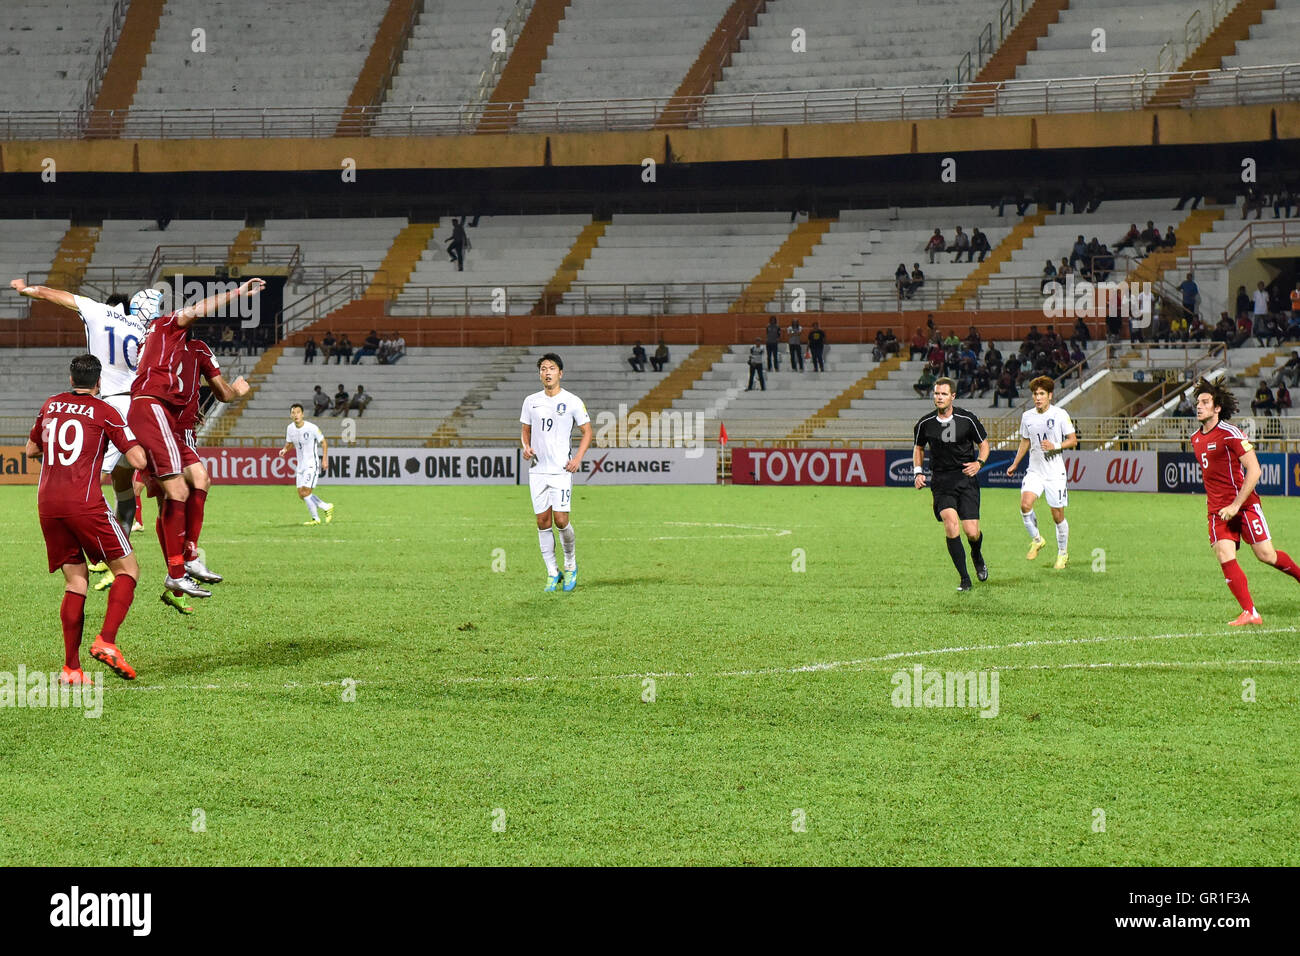 Seremban, Malaysia. 6th September, 2016. Ji Dong Won,10 of South Korea (L) heads the ball against Syrian players during the 2018 FIFA World Cup qualifying football match between South Korea - Syria at Tuanku Abdul Rahman Stadium in Seremban on September 6, 2016 Credit:  Chris JUNG/Alamy Live News Stock Photo